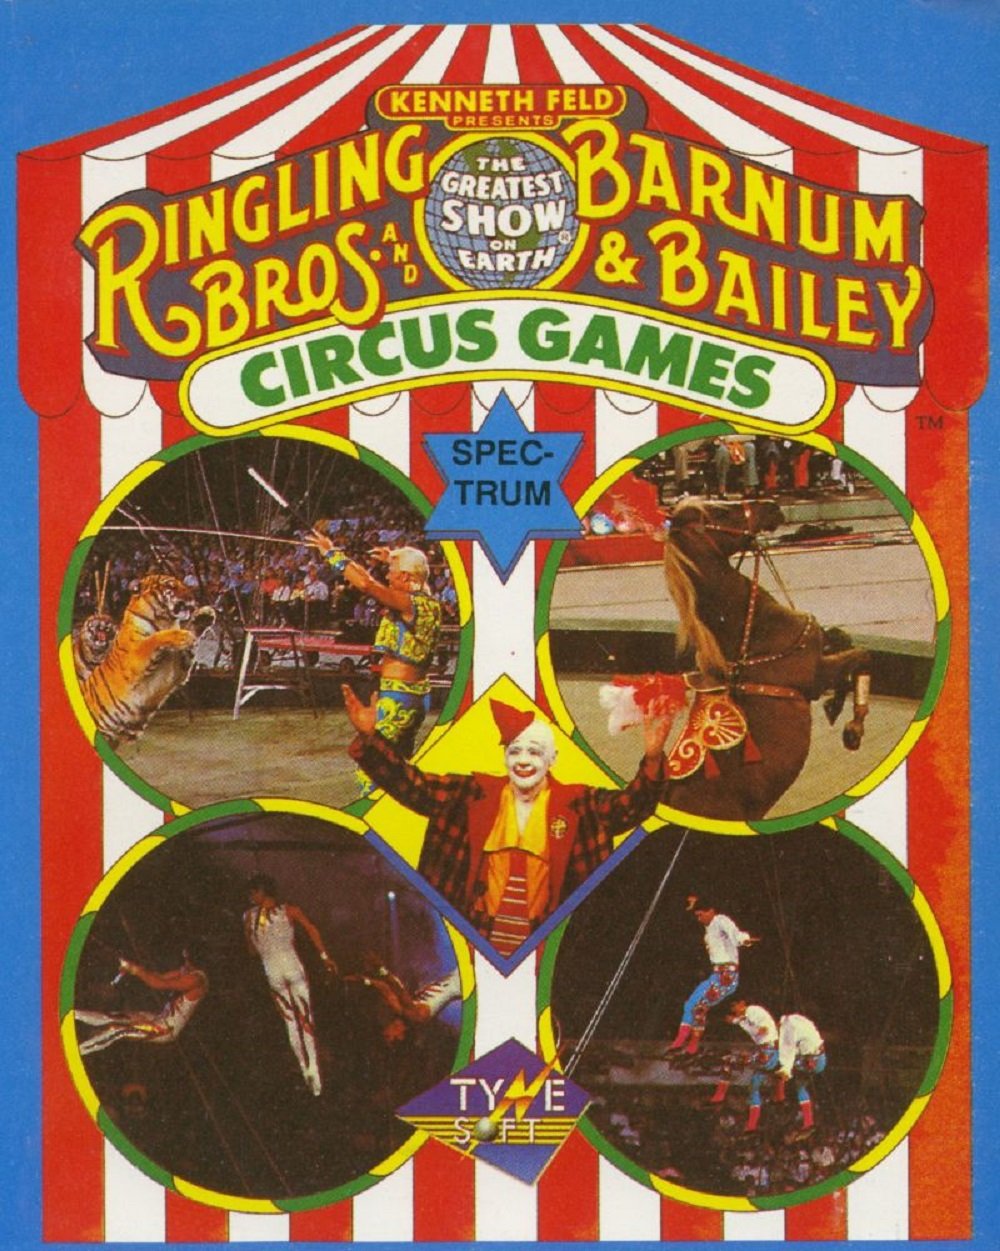 Image of Circus Games